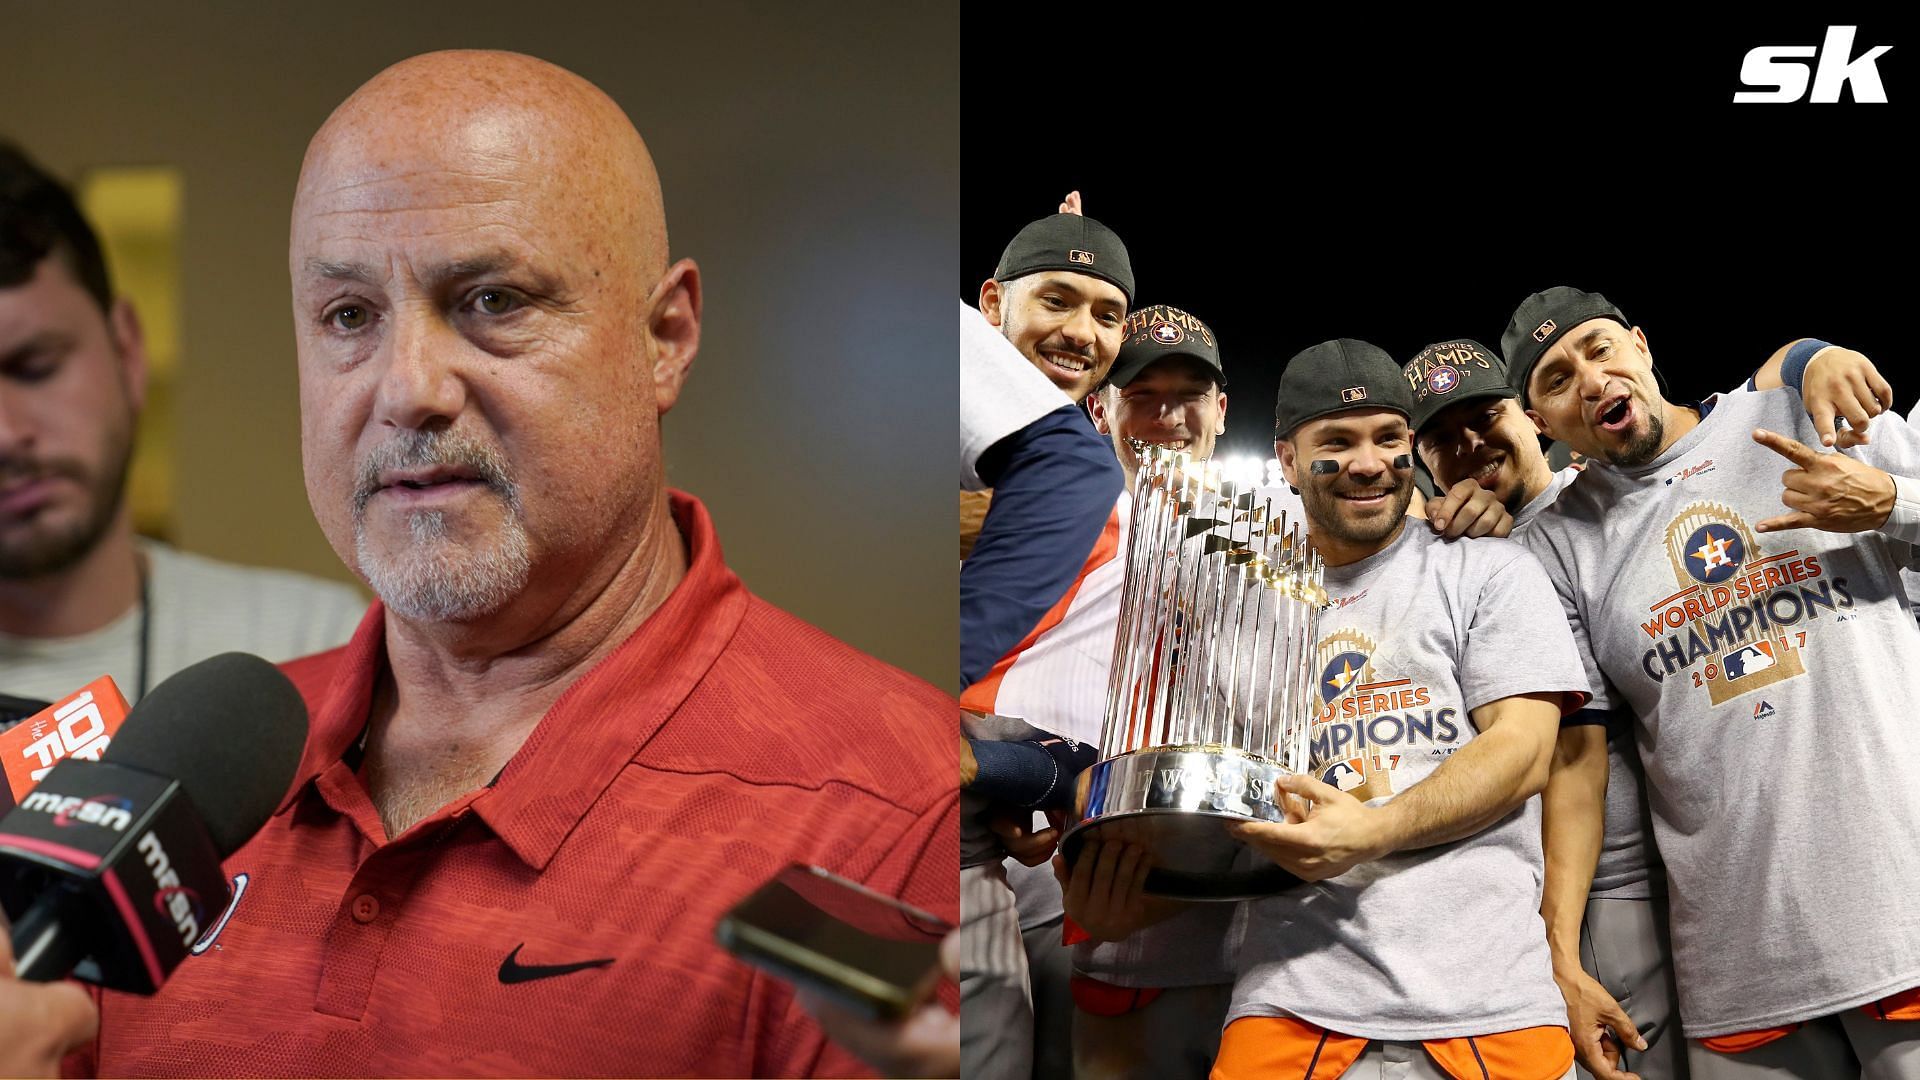 When Nationals GM Mike Rizzo called out the Astros over sign-stealing scandal